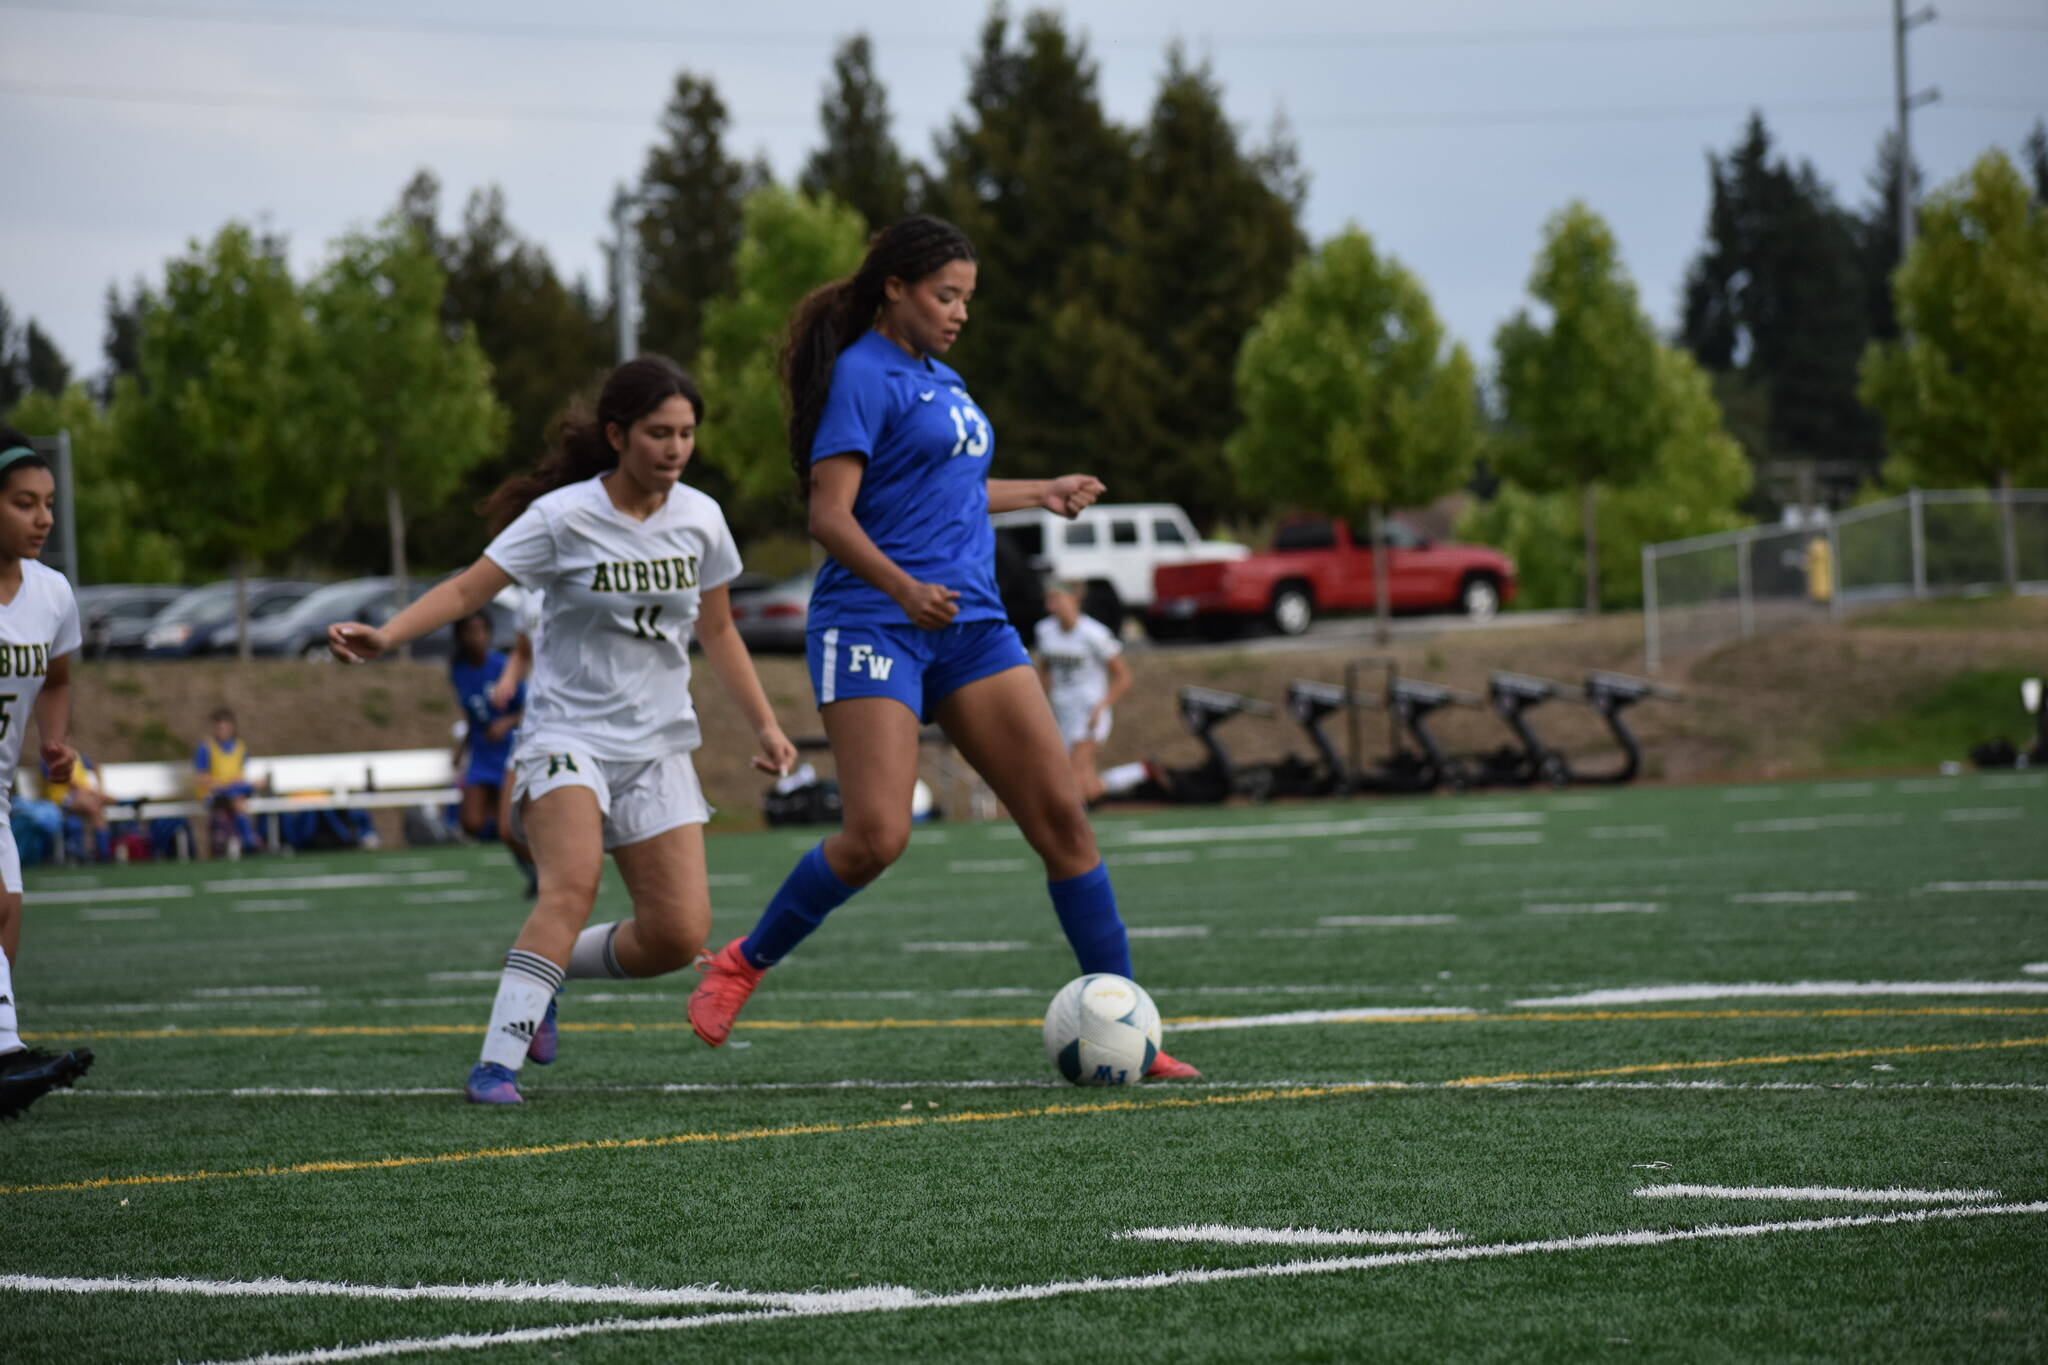 Federal Way's first goal scorer Jada Bynum with the ball at her feet. Ben Ray / The Mirror